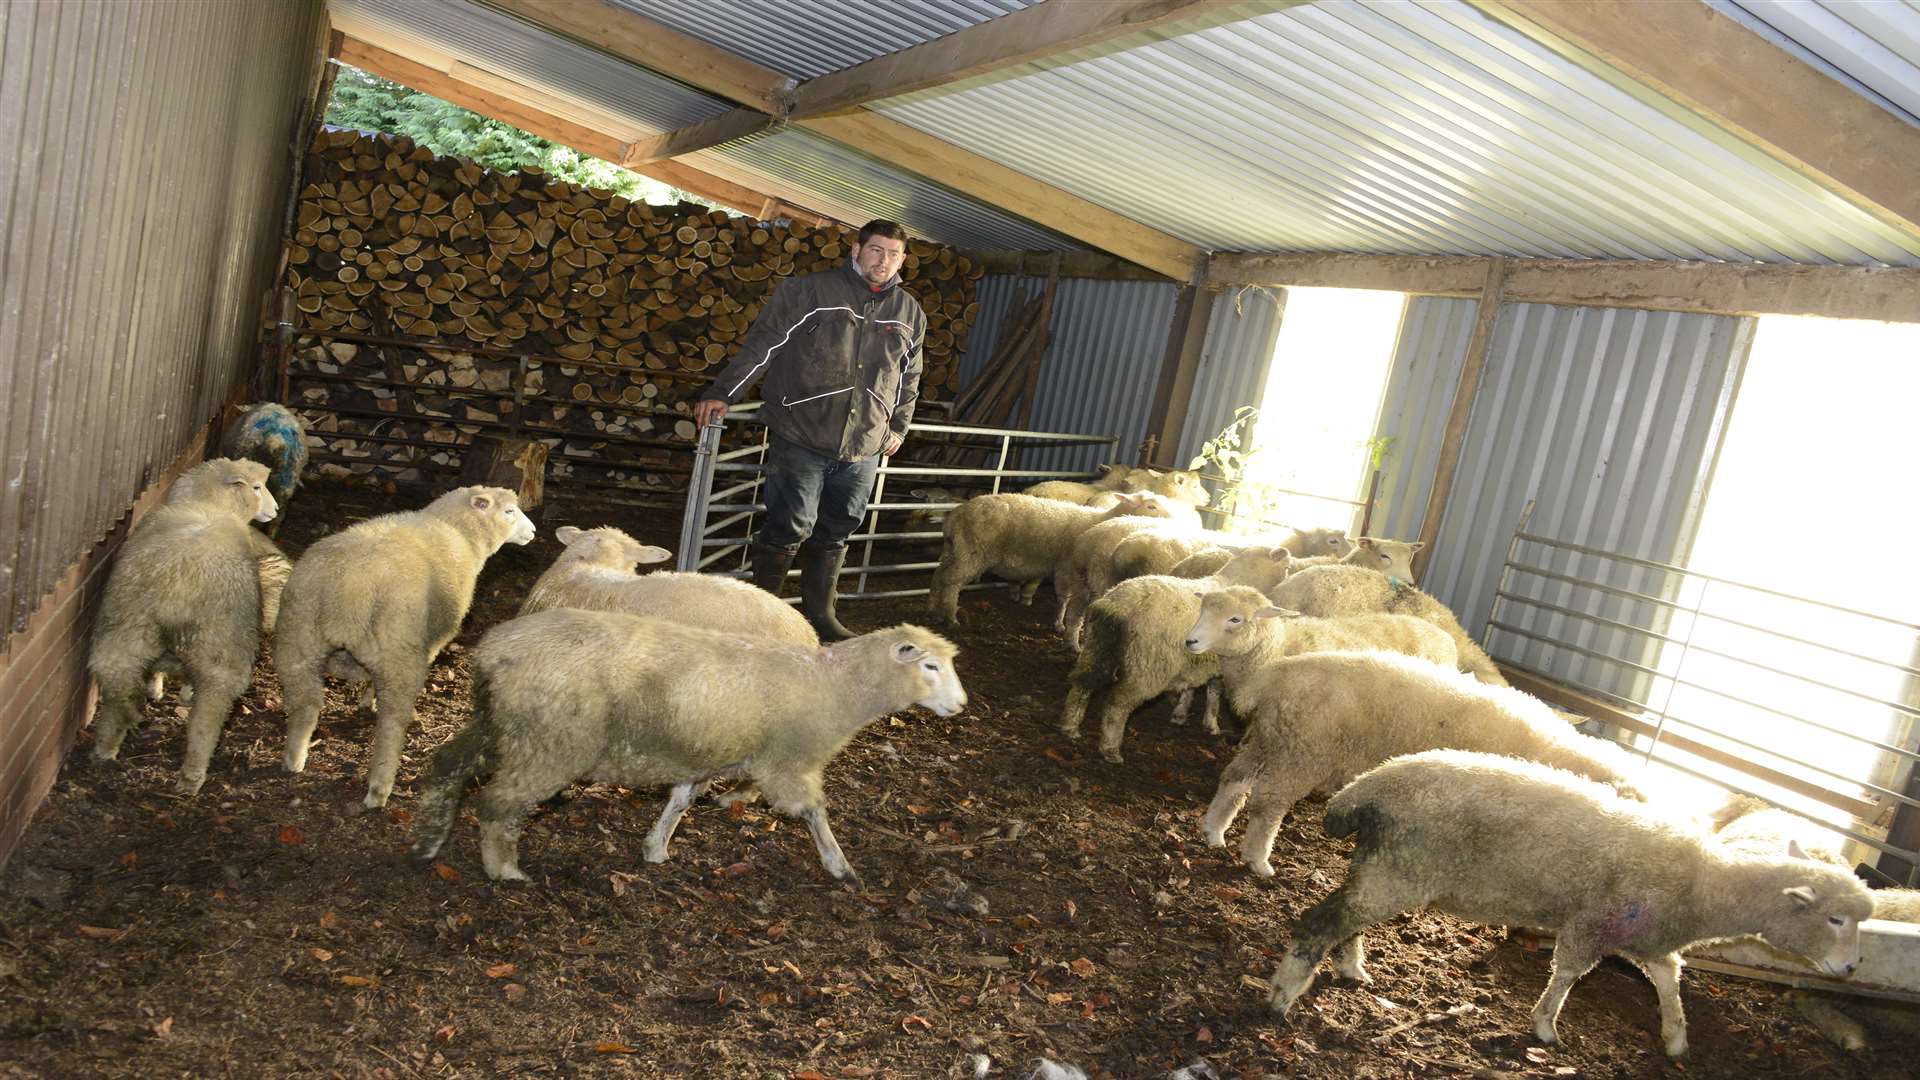 Farmer Alex Pynn said the sheep that survived were shocked and wounded